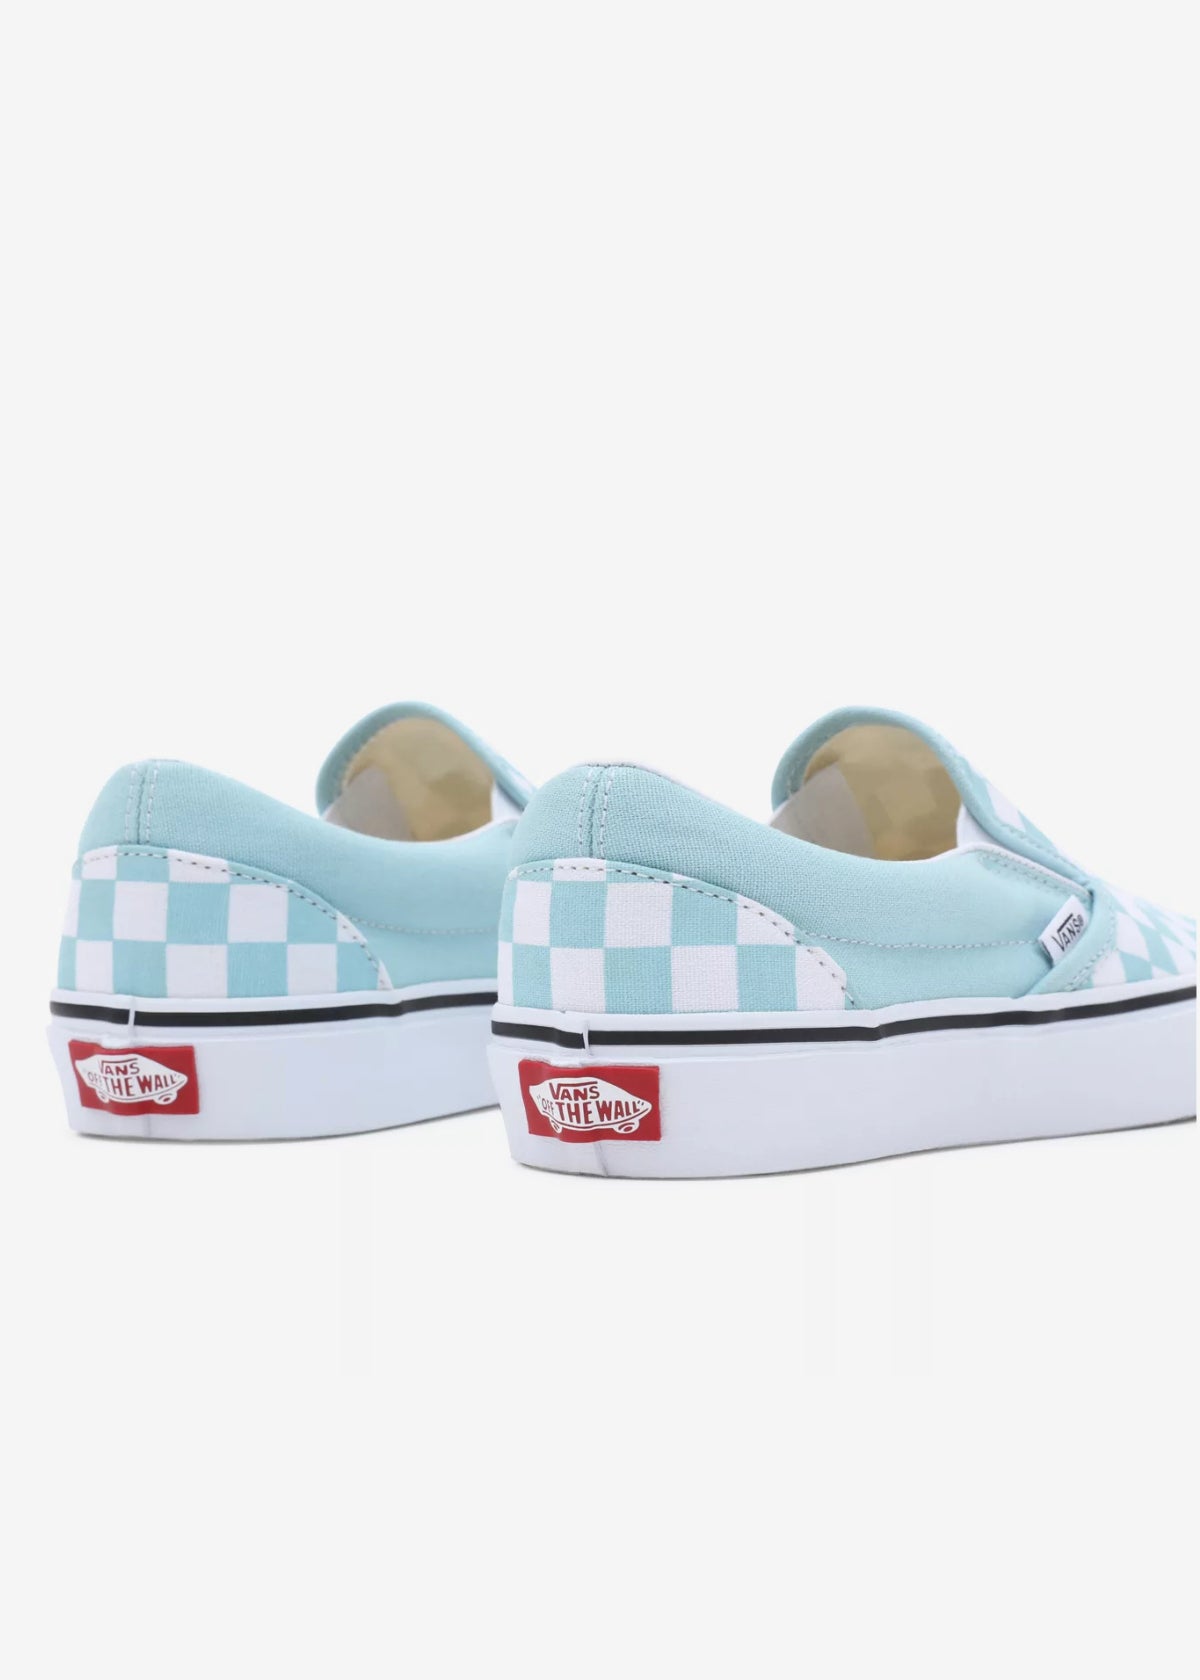 Vans Color Theory Classic Slip-On Shoes